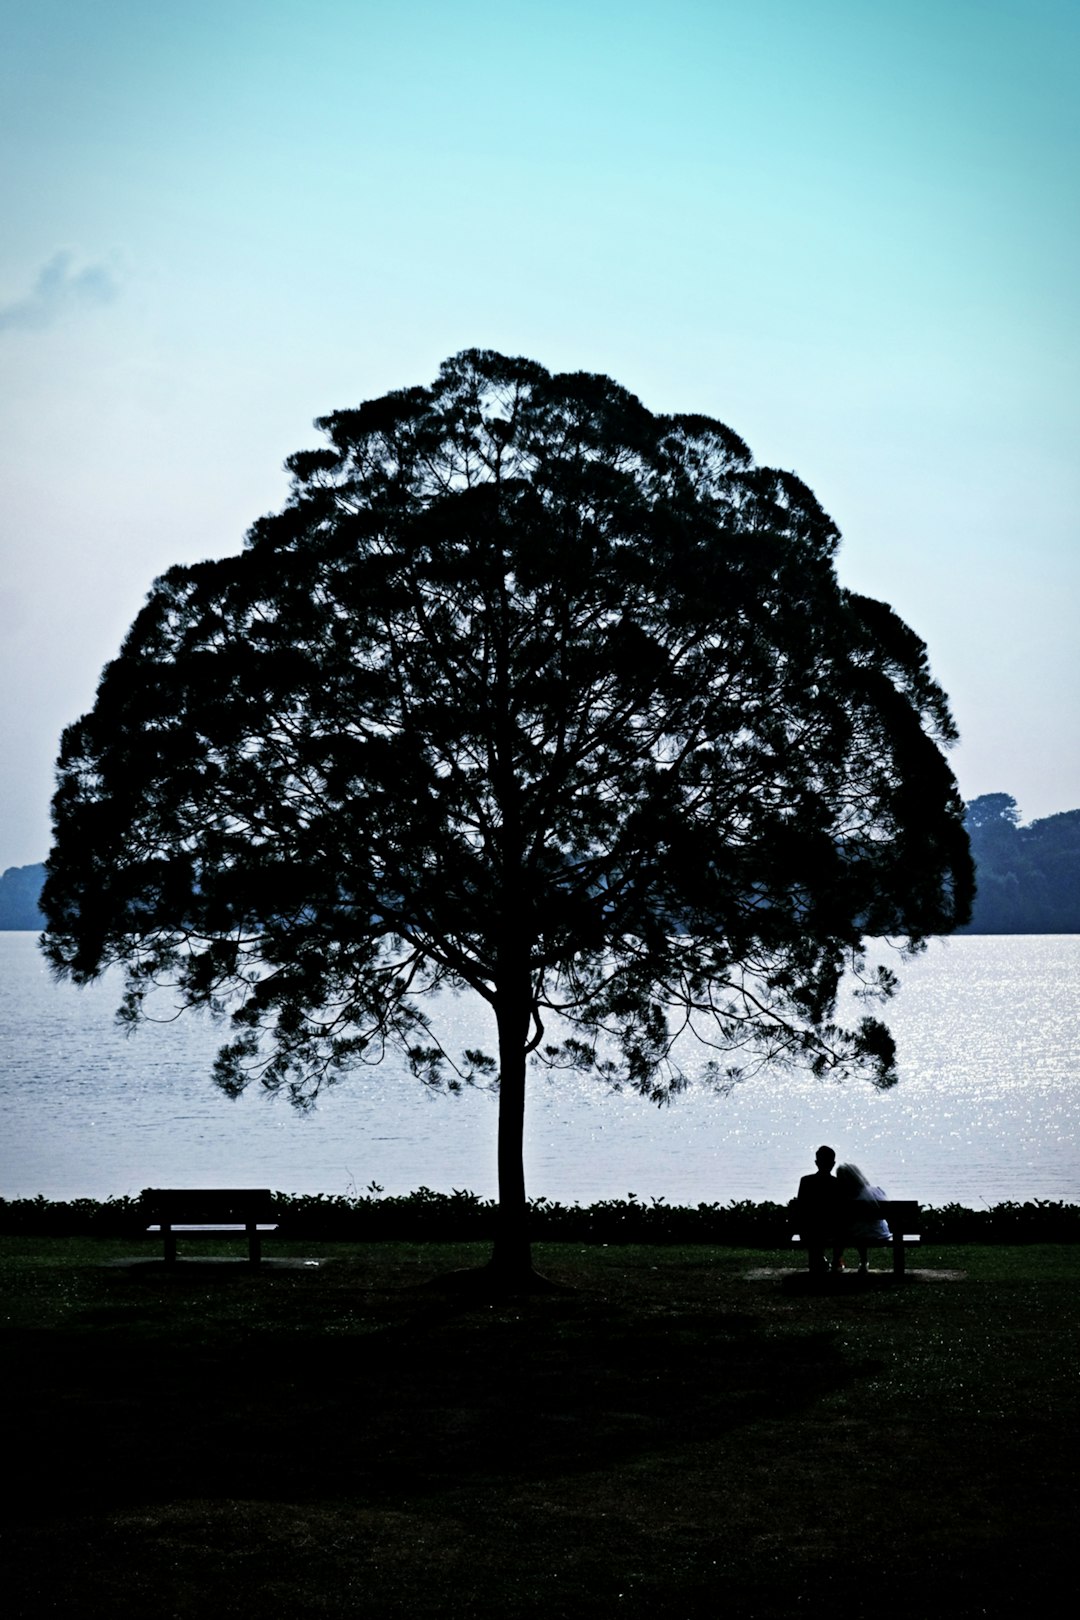 silhouette of people standing near tree during daytime